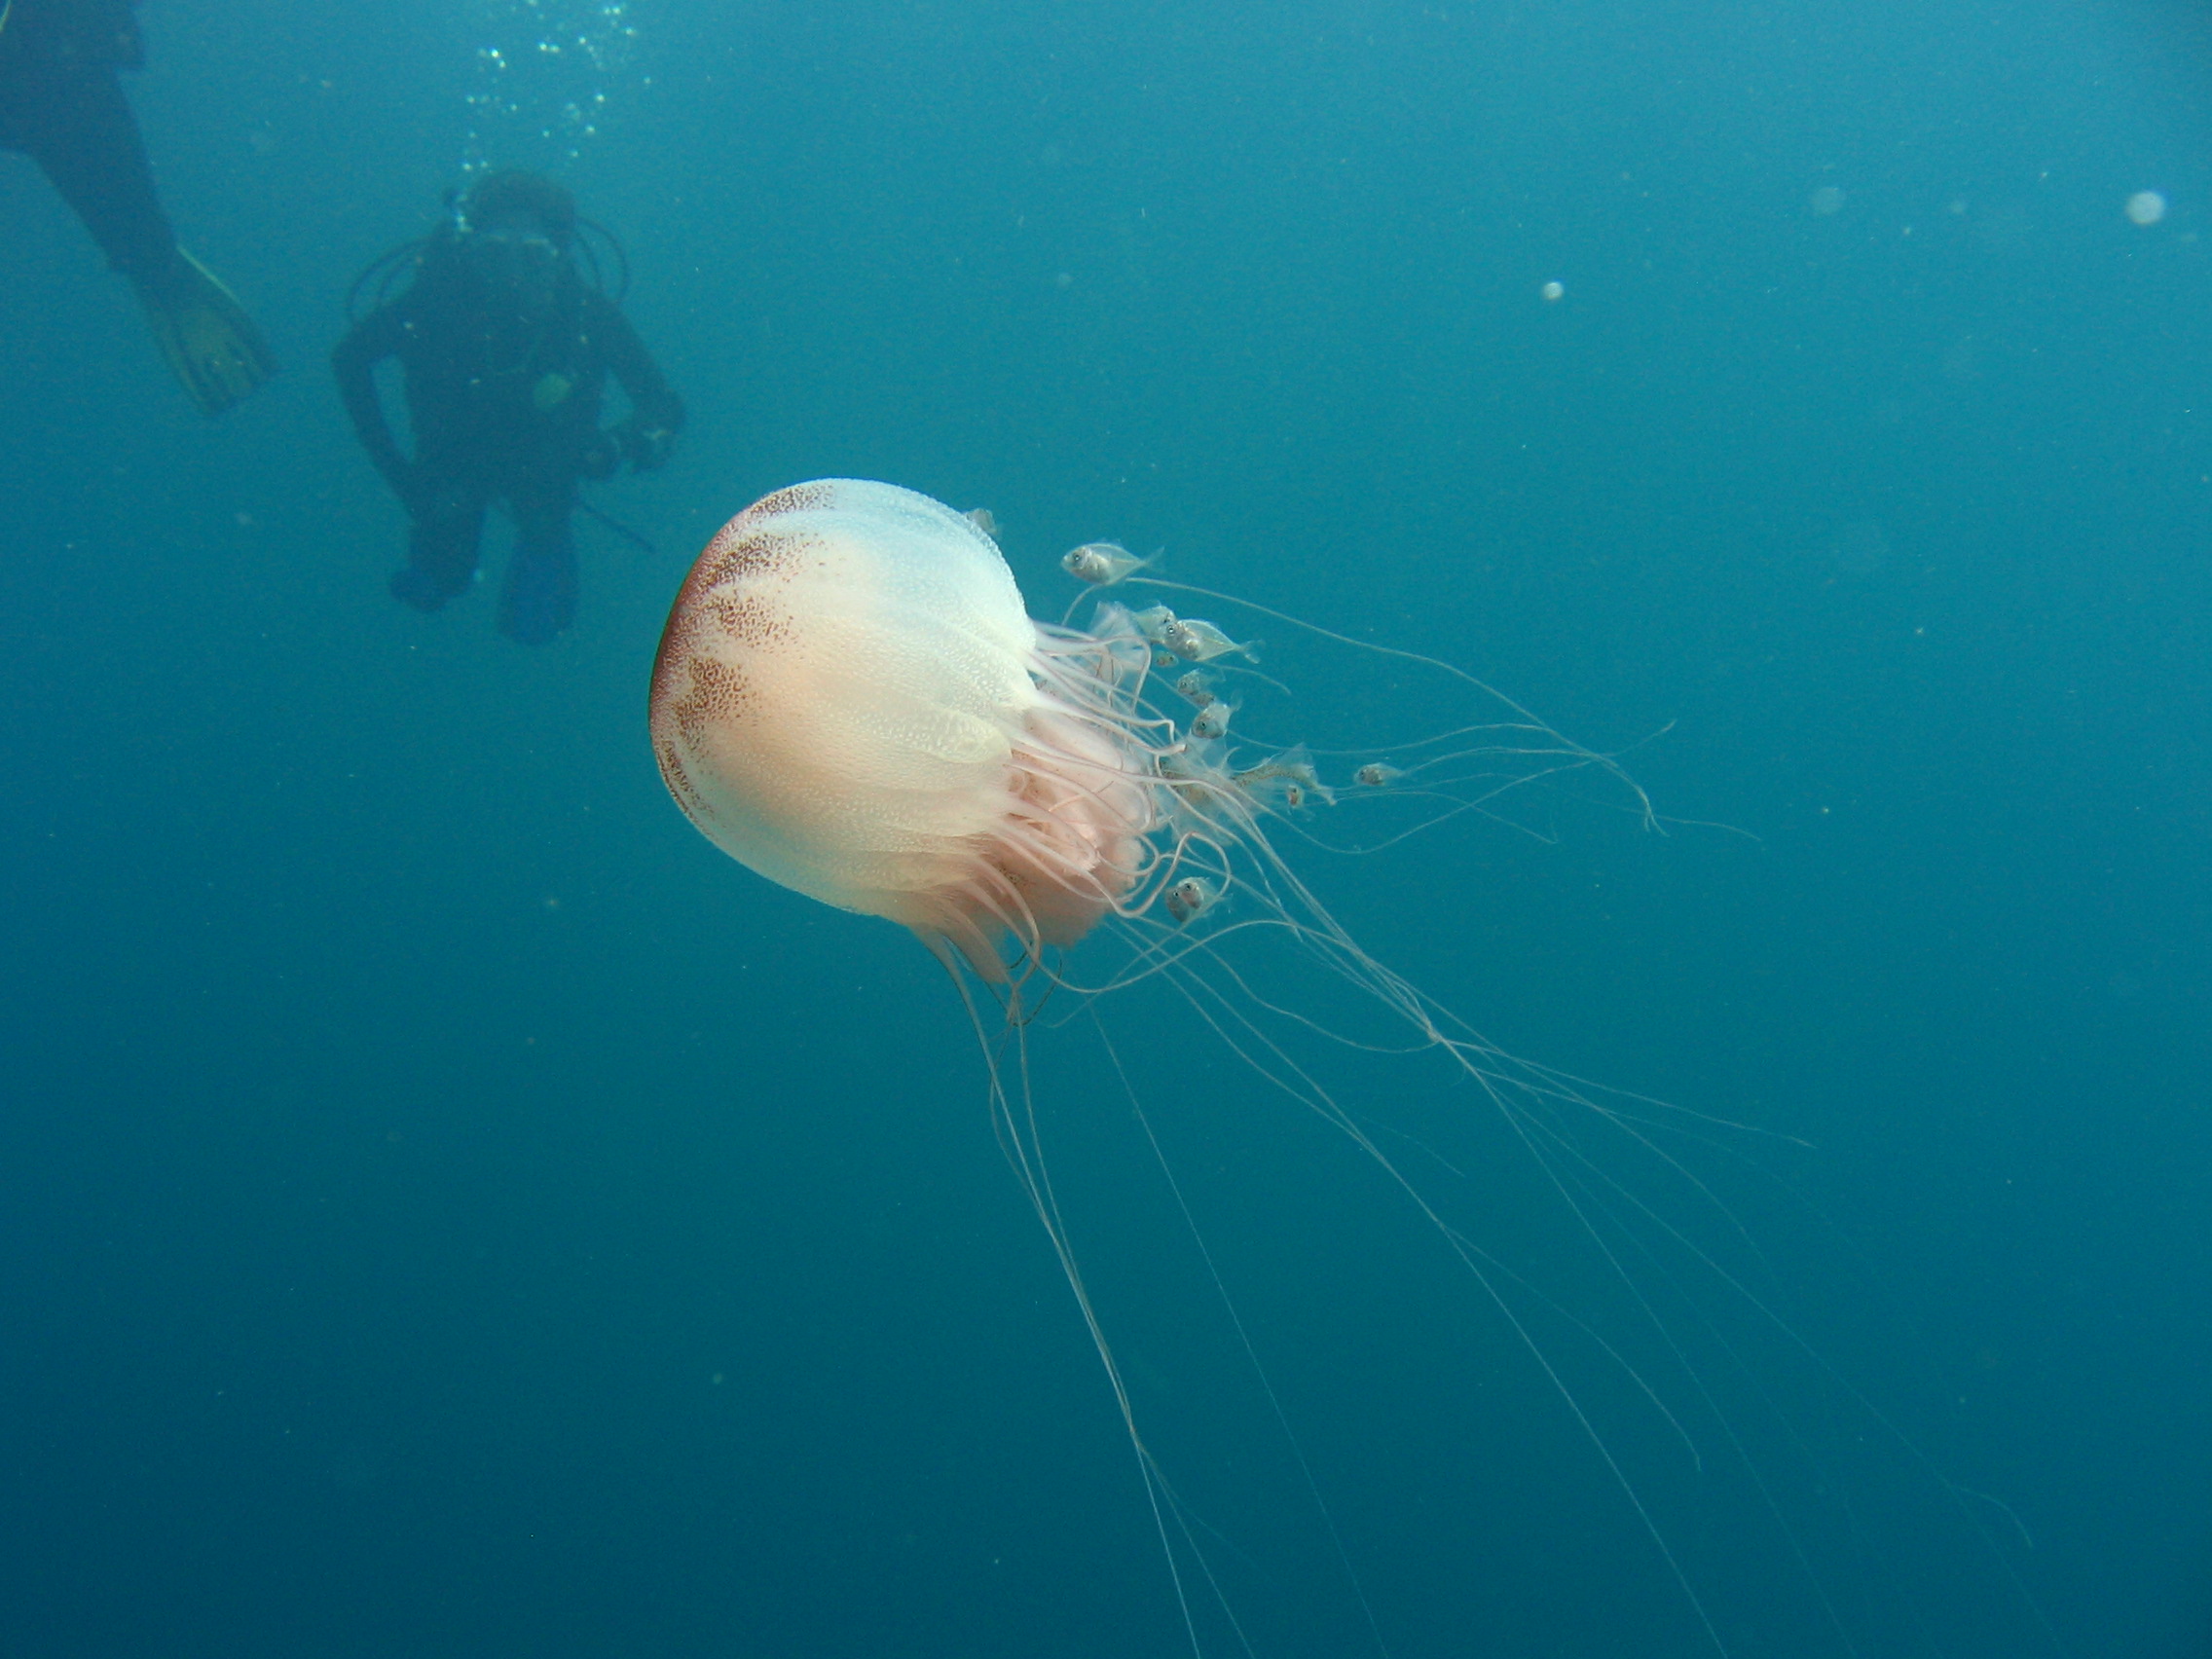 Jelly at hangline